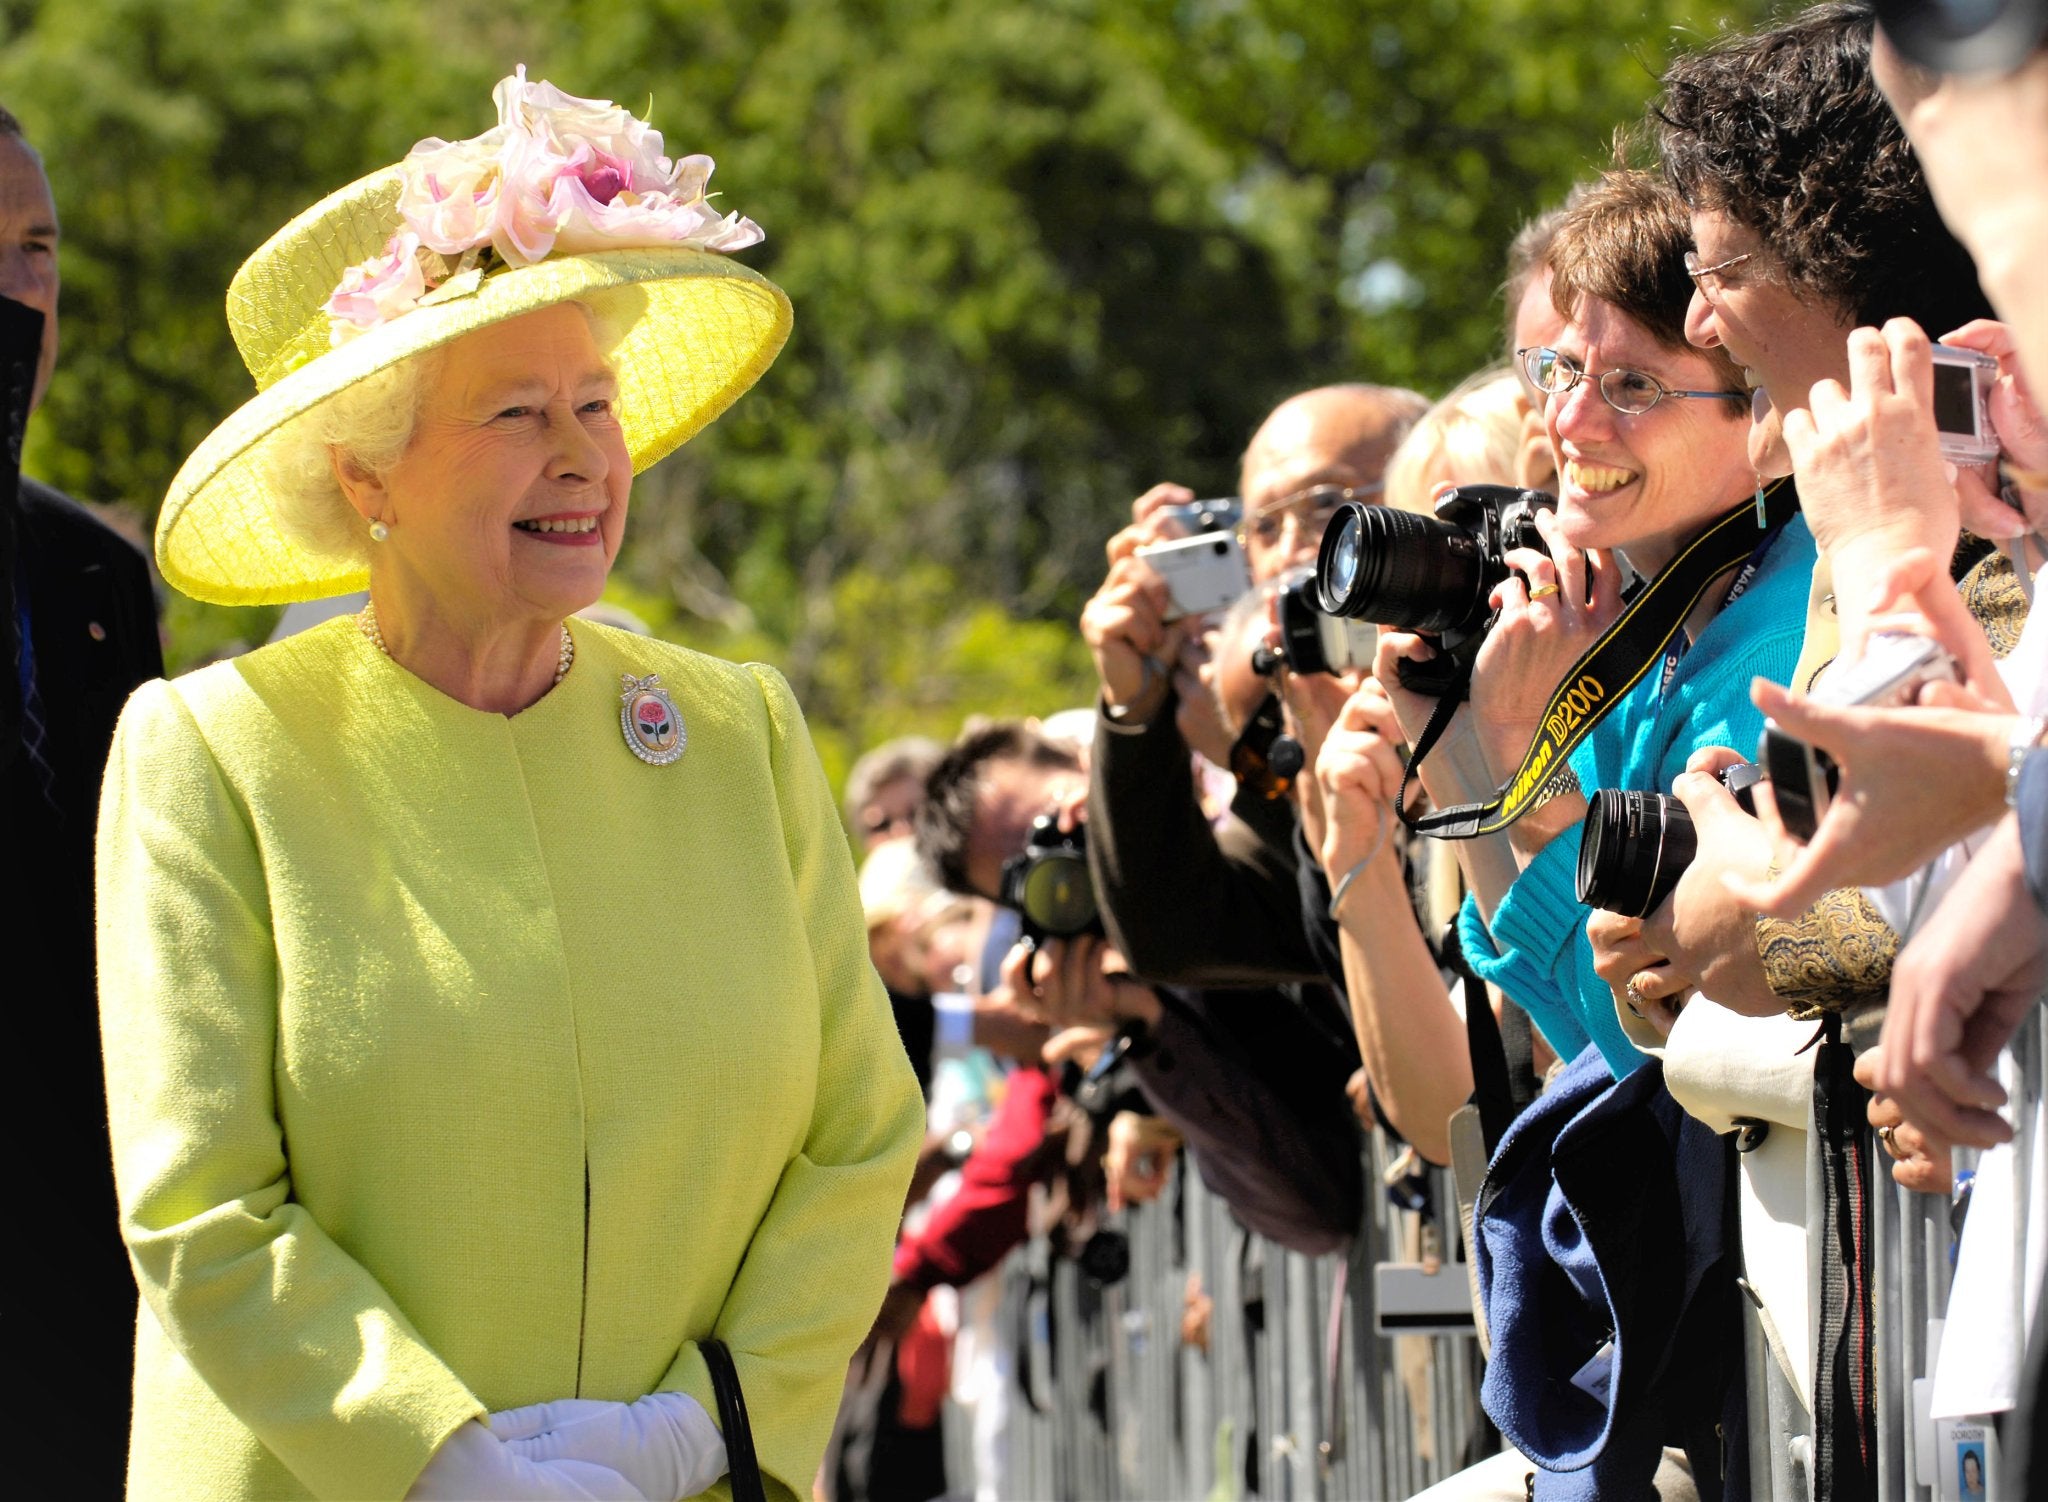 30 Fun And Interesting Facts About Queen Elizabeth II - DSF Antique Jewelry